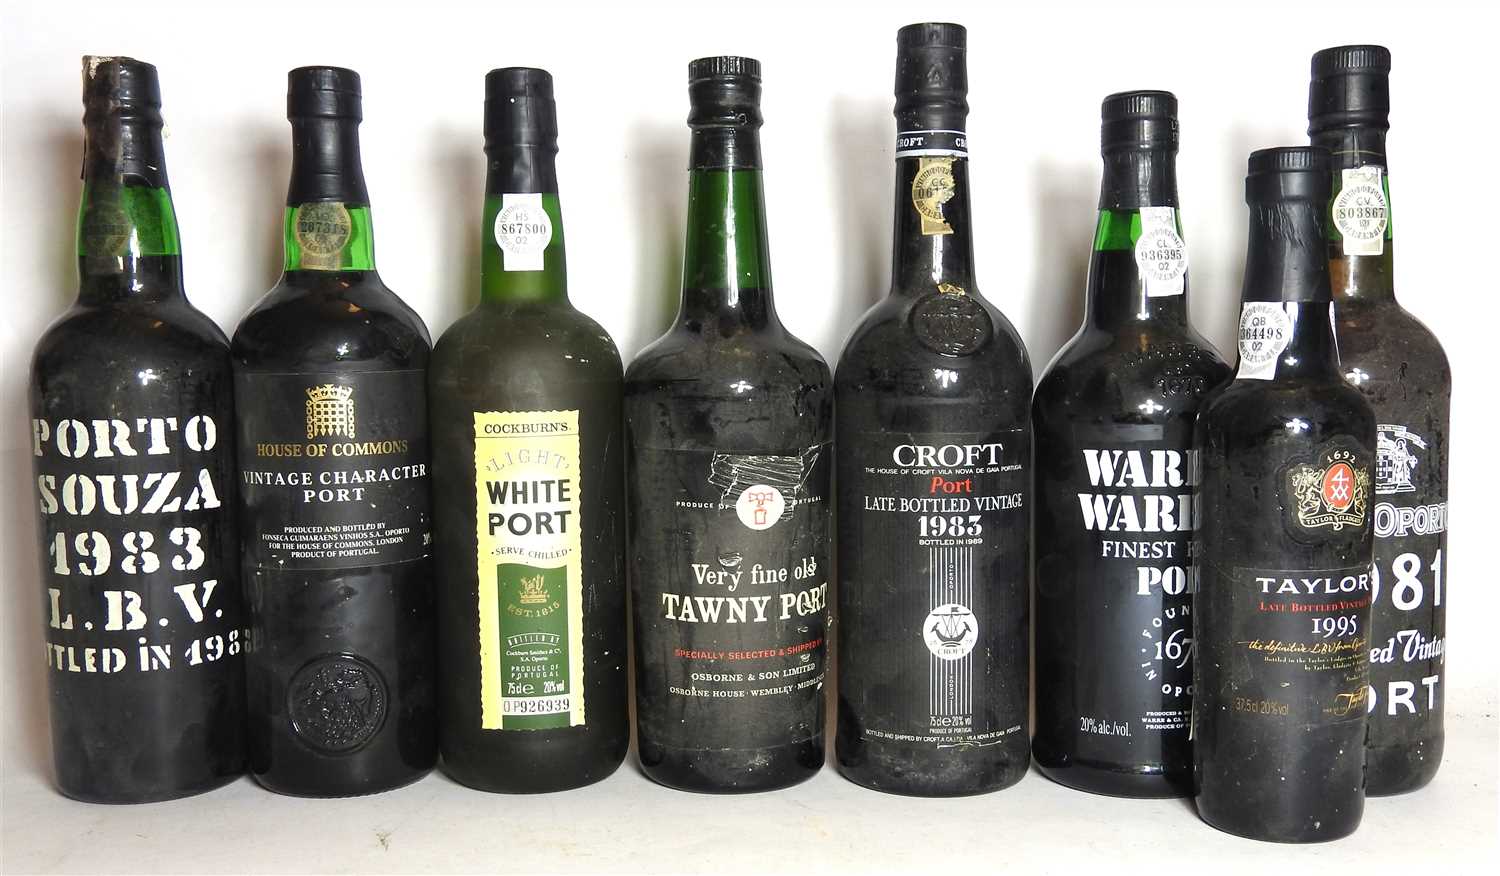 Lot 77 - Assorted port: Porto Souza, 1983, Royal Oporto, 1981 and 5 others, total 7 bottles and 1 half bottle